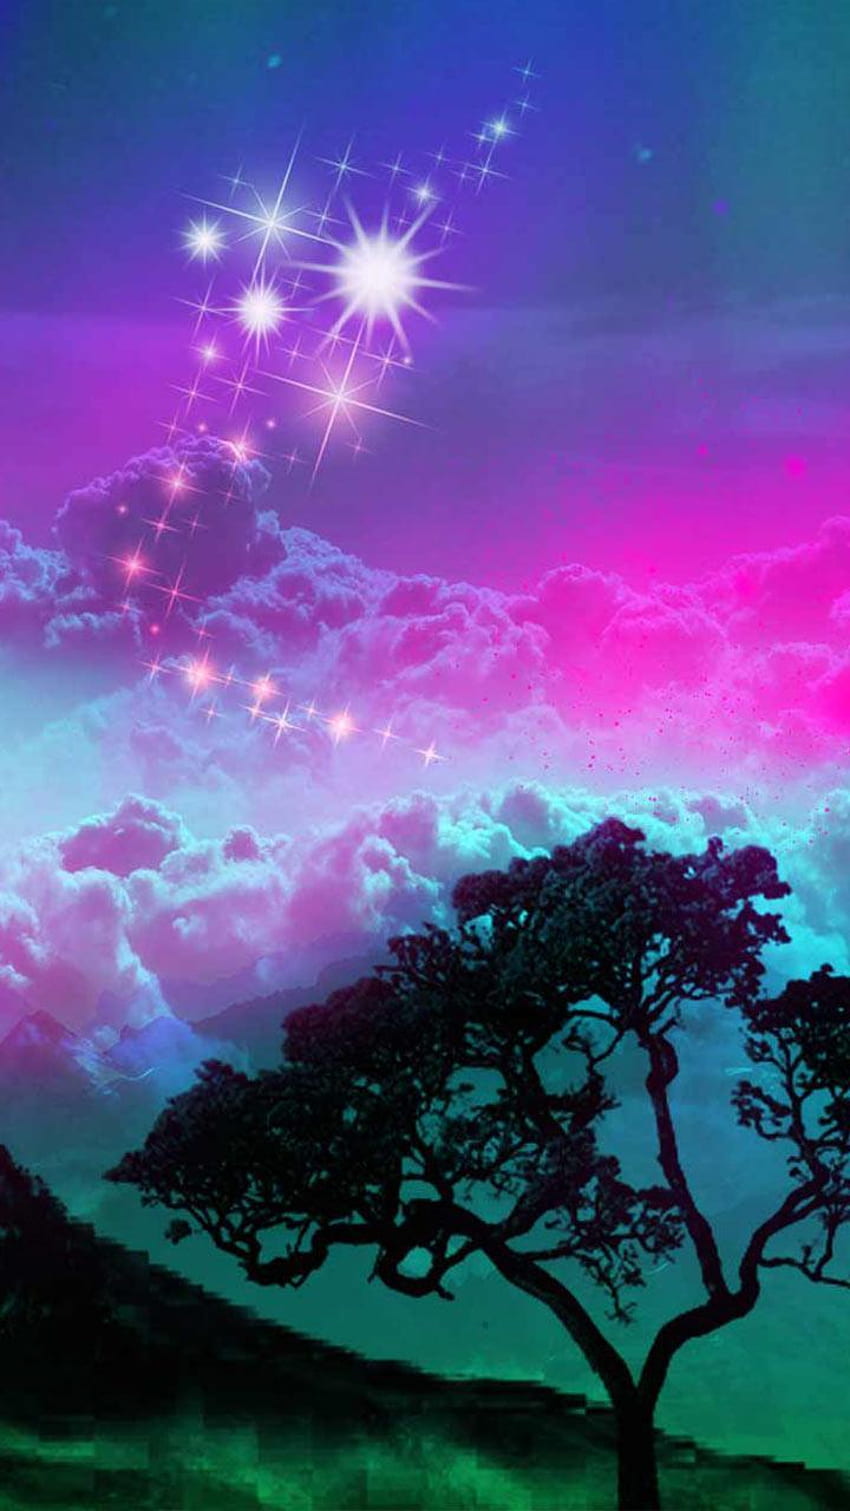 Dream Sky for Android, Enchanted Sky HD phone wallpaper